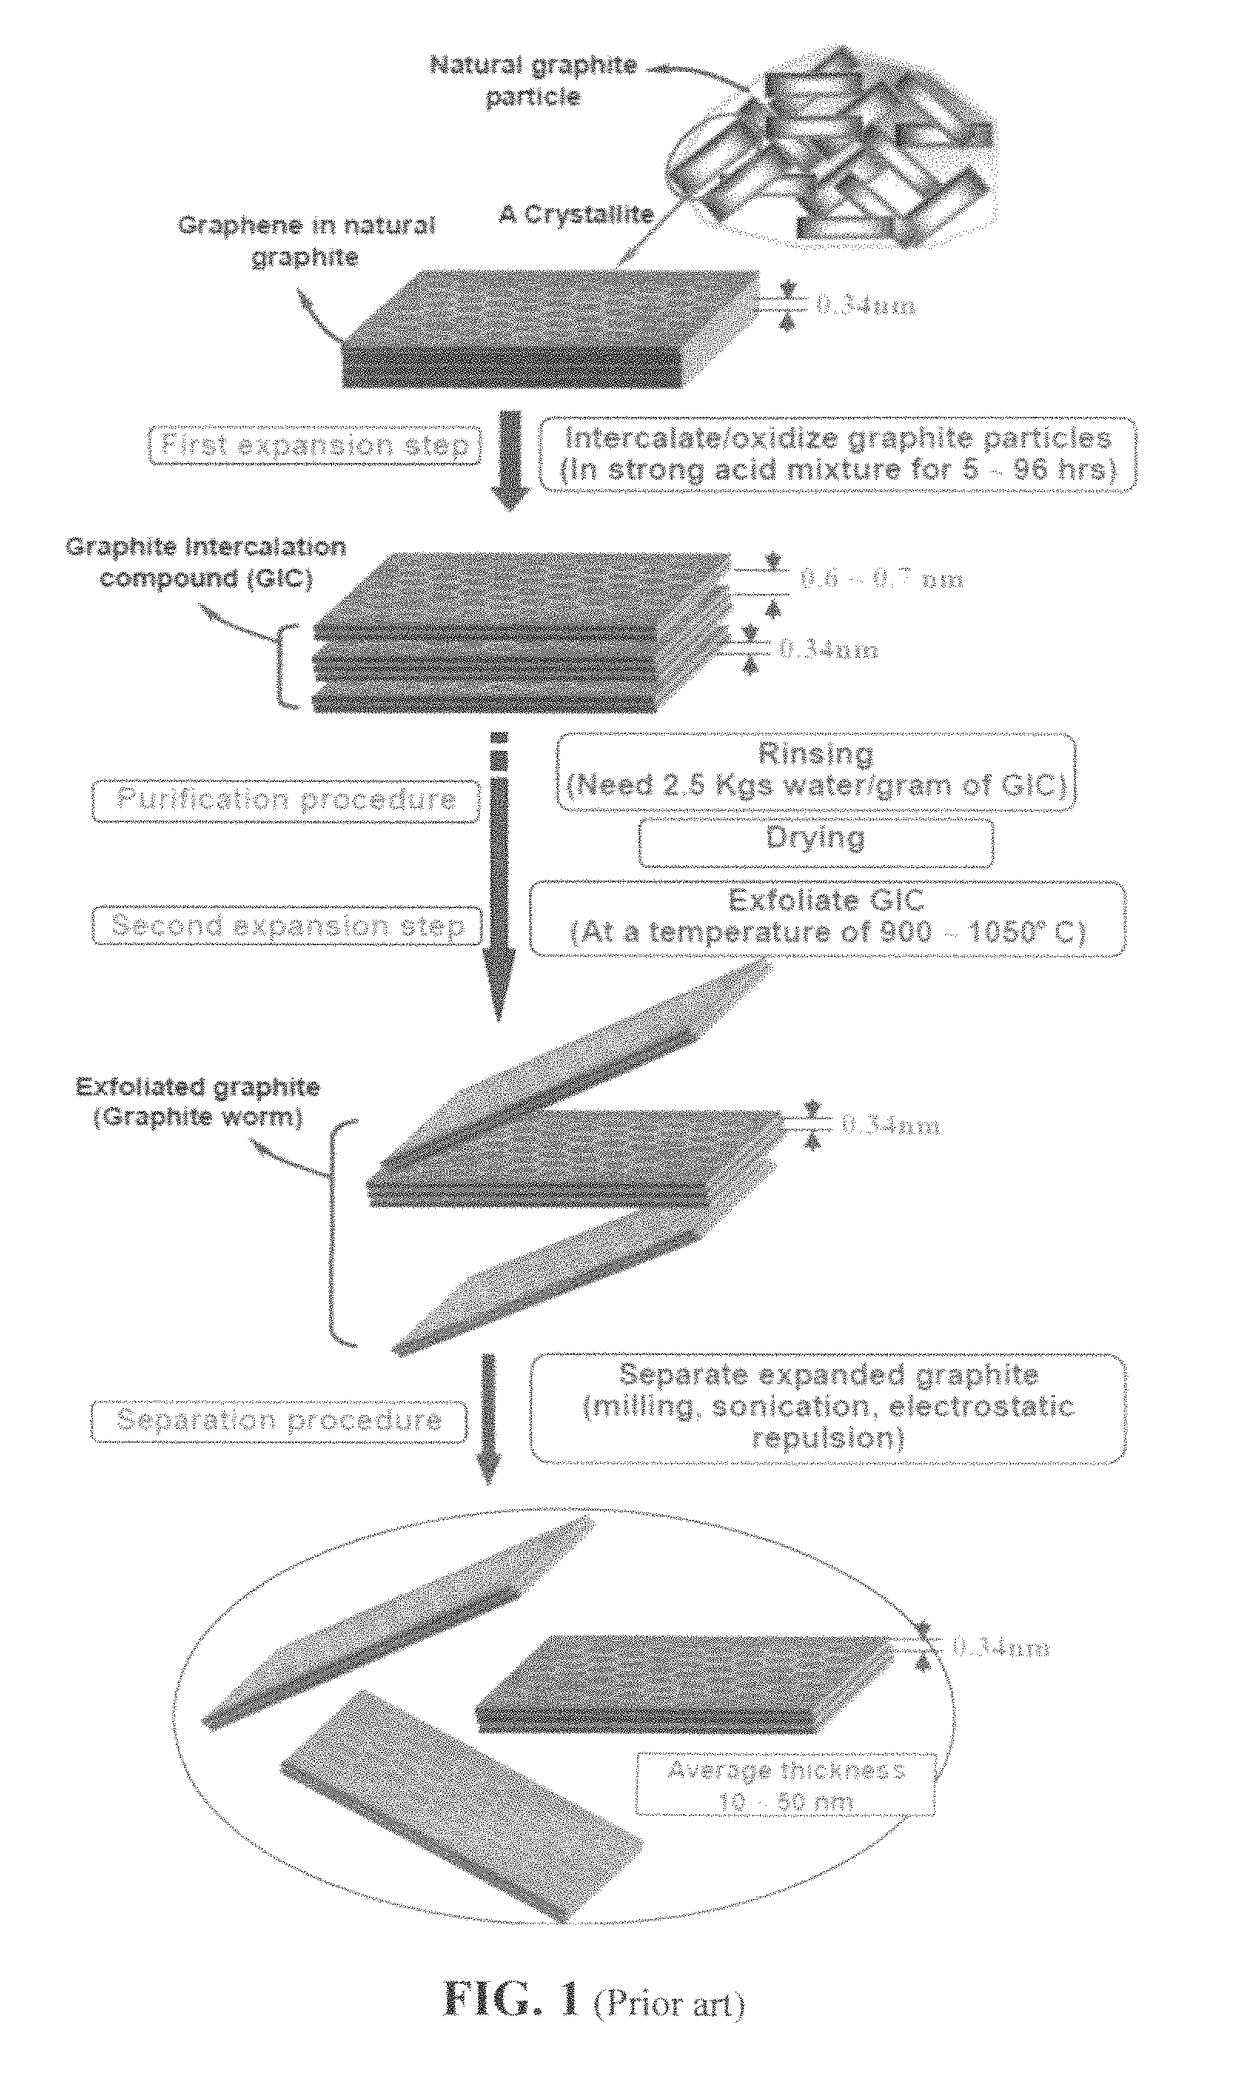 Chemical-free production of graphene-reinforced polymer matrix composites